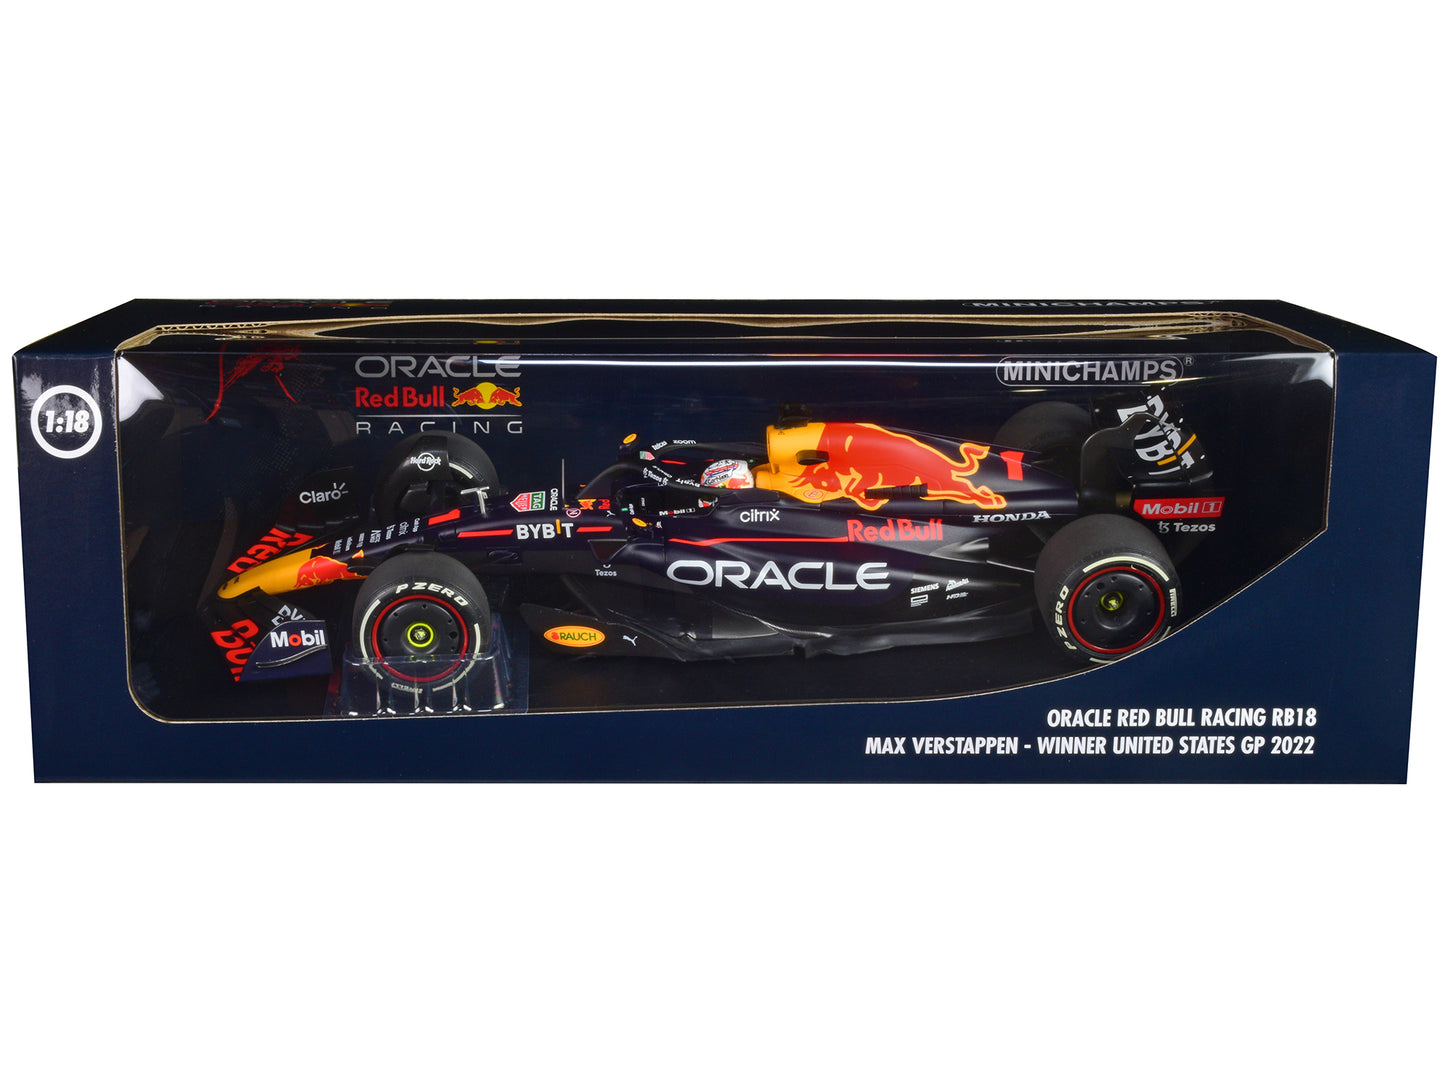 Red Bull Racing RB18 #1 Max Verstappen "Oracle" Winner F1 Formula One "United States GP" (2022) with Driver Limited Edition to 258 pieces Worldwide 1/18 Diecast Model Car by Minichamps